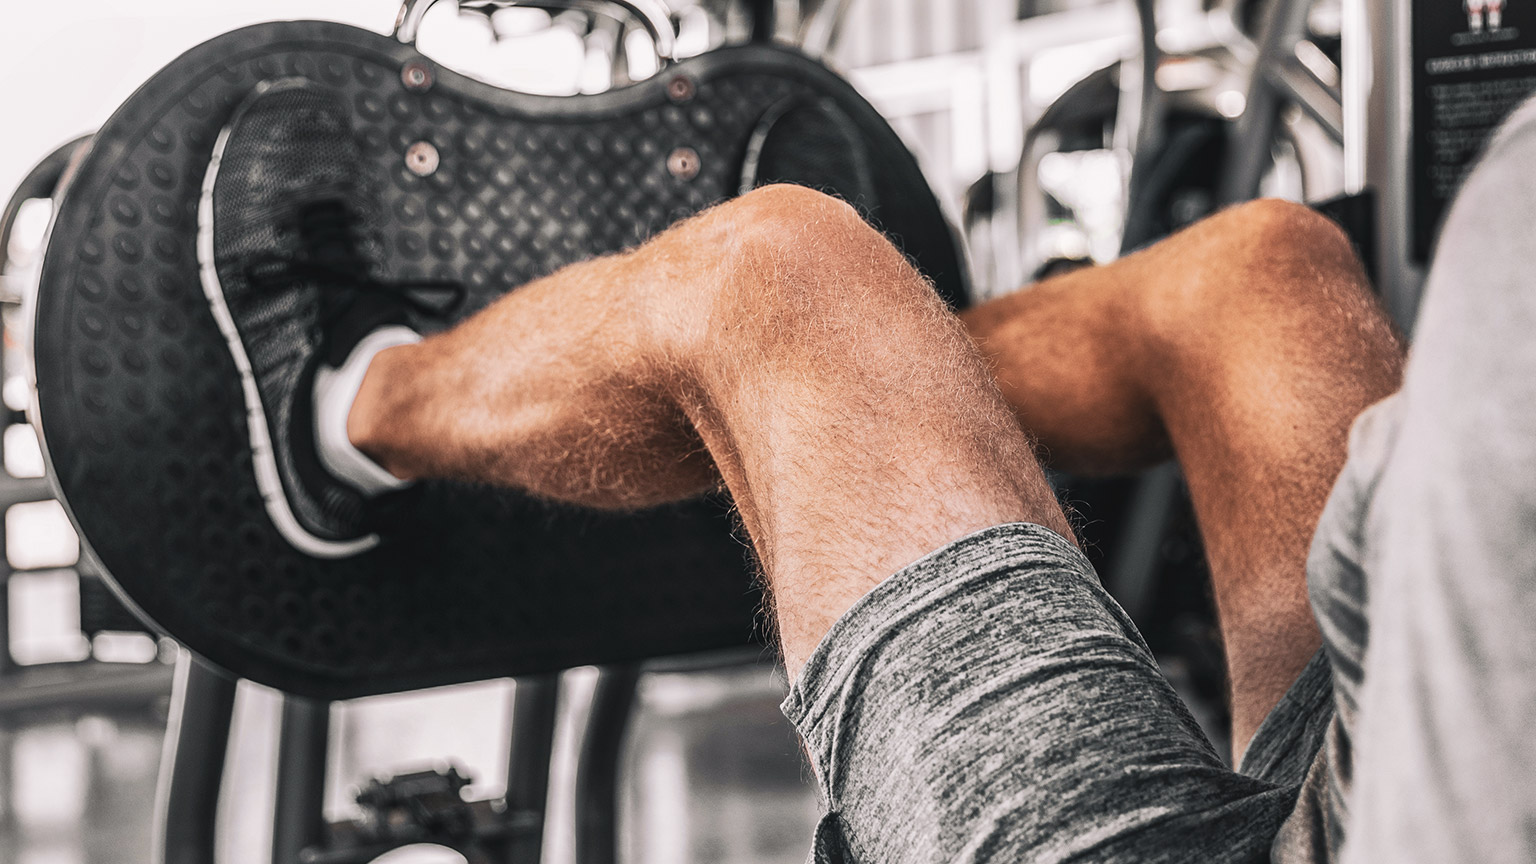 Man using leg press with focus on the knee joint